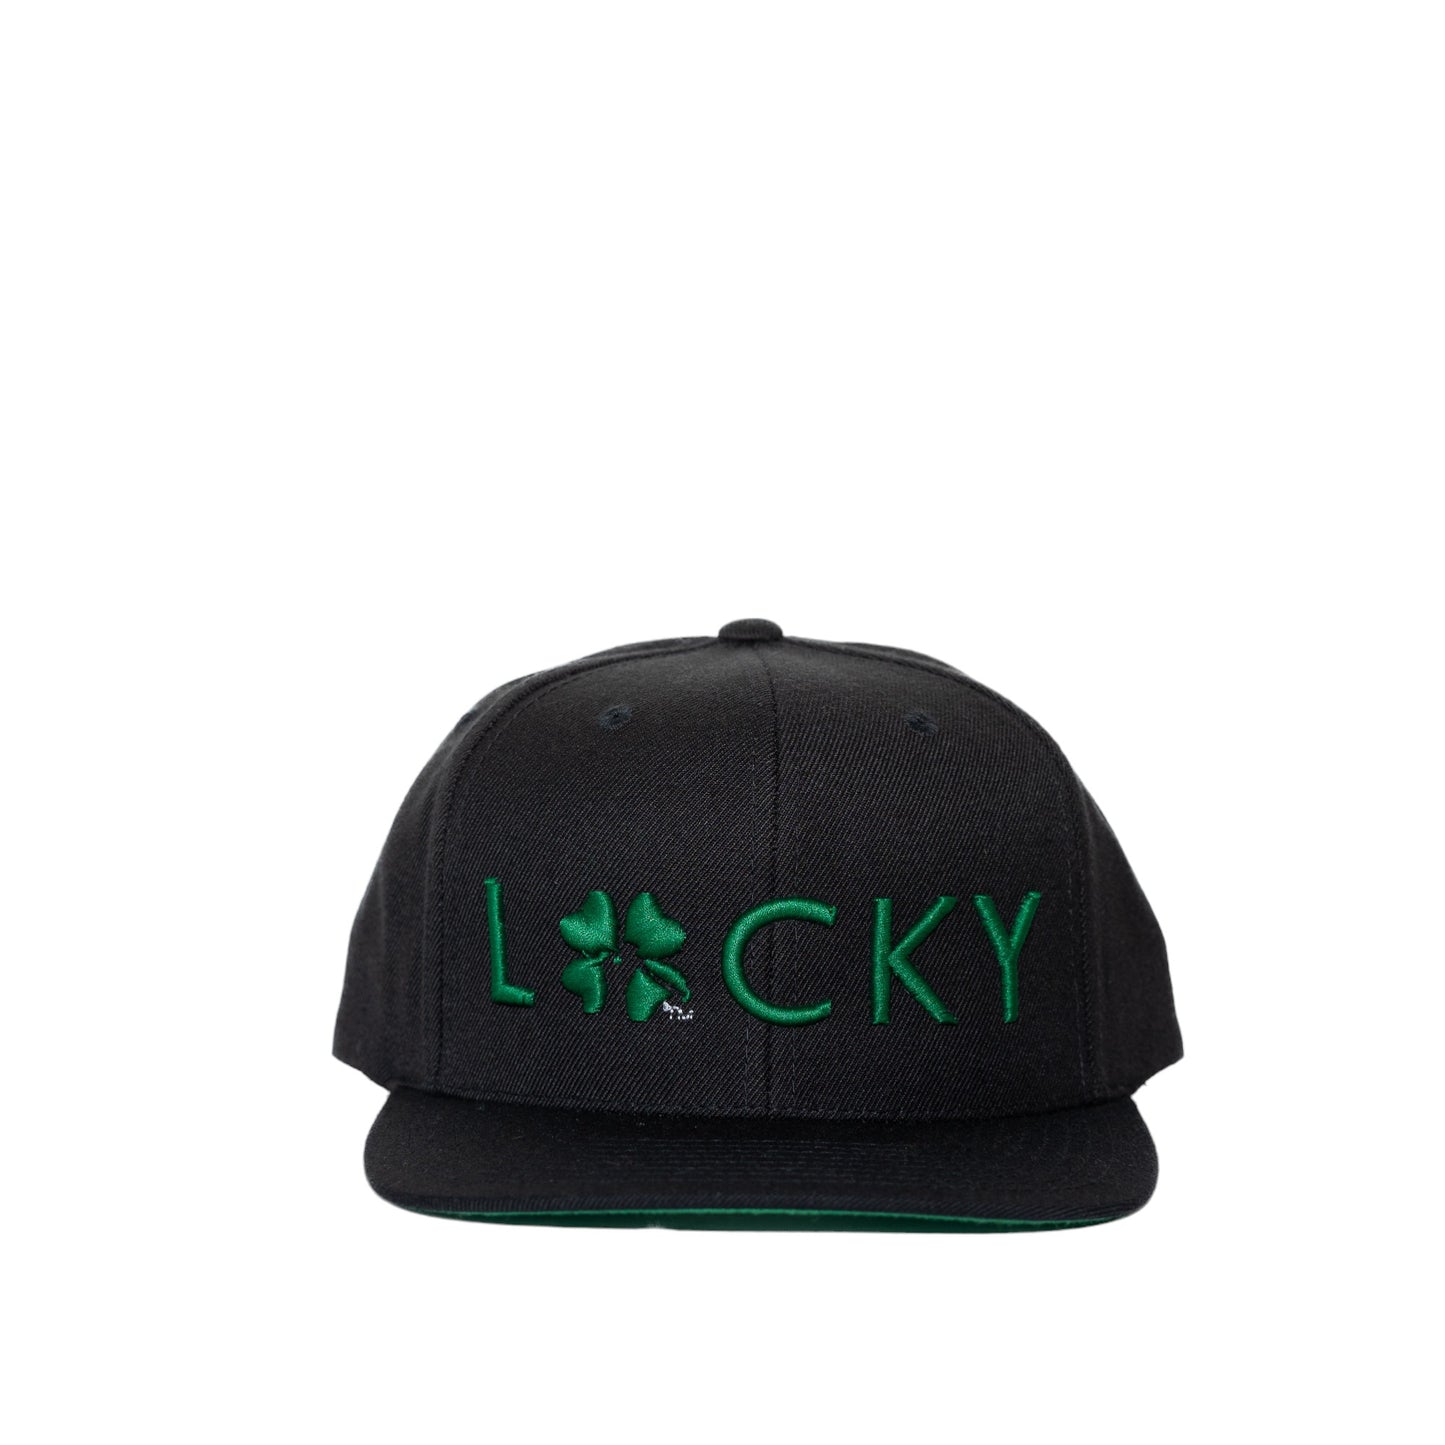 Lucky Golf Embroidered Hat- Flat Bill (Black)